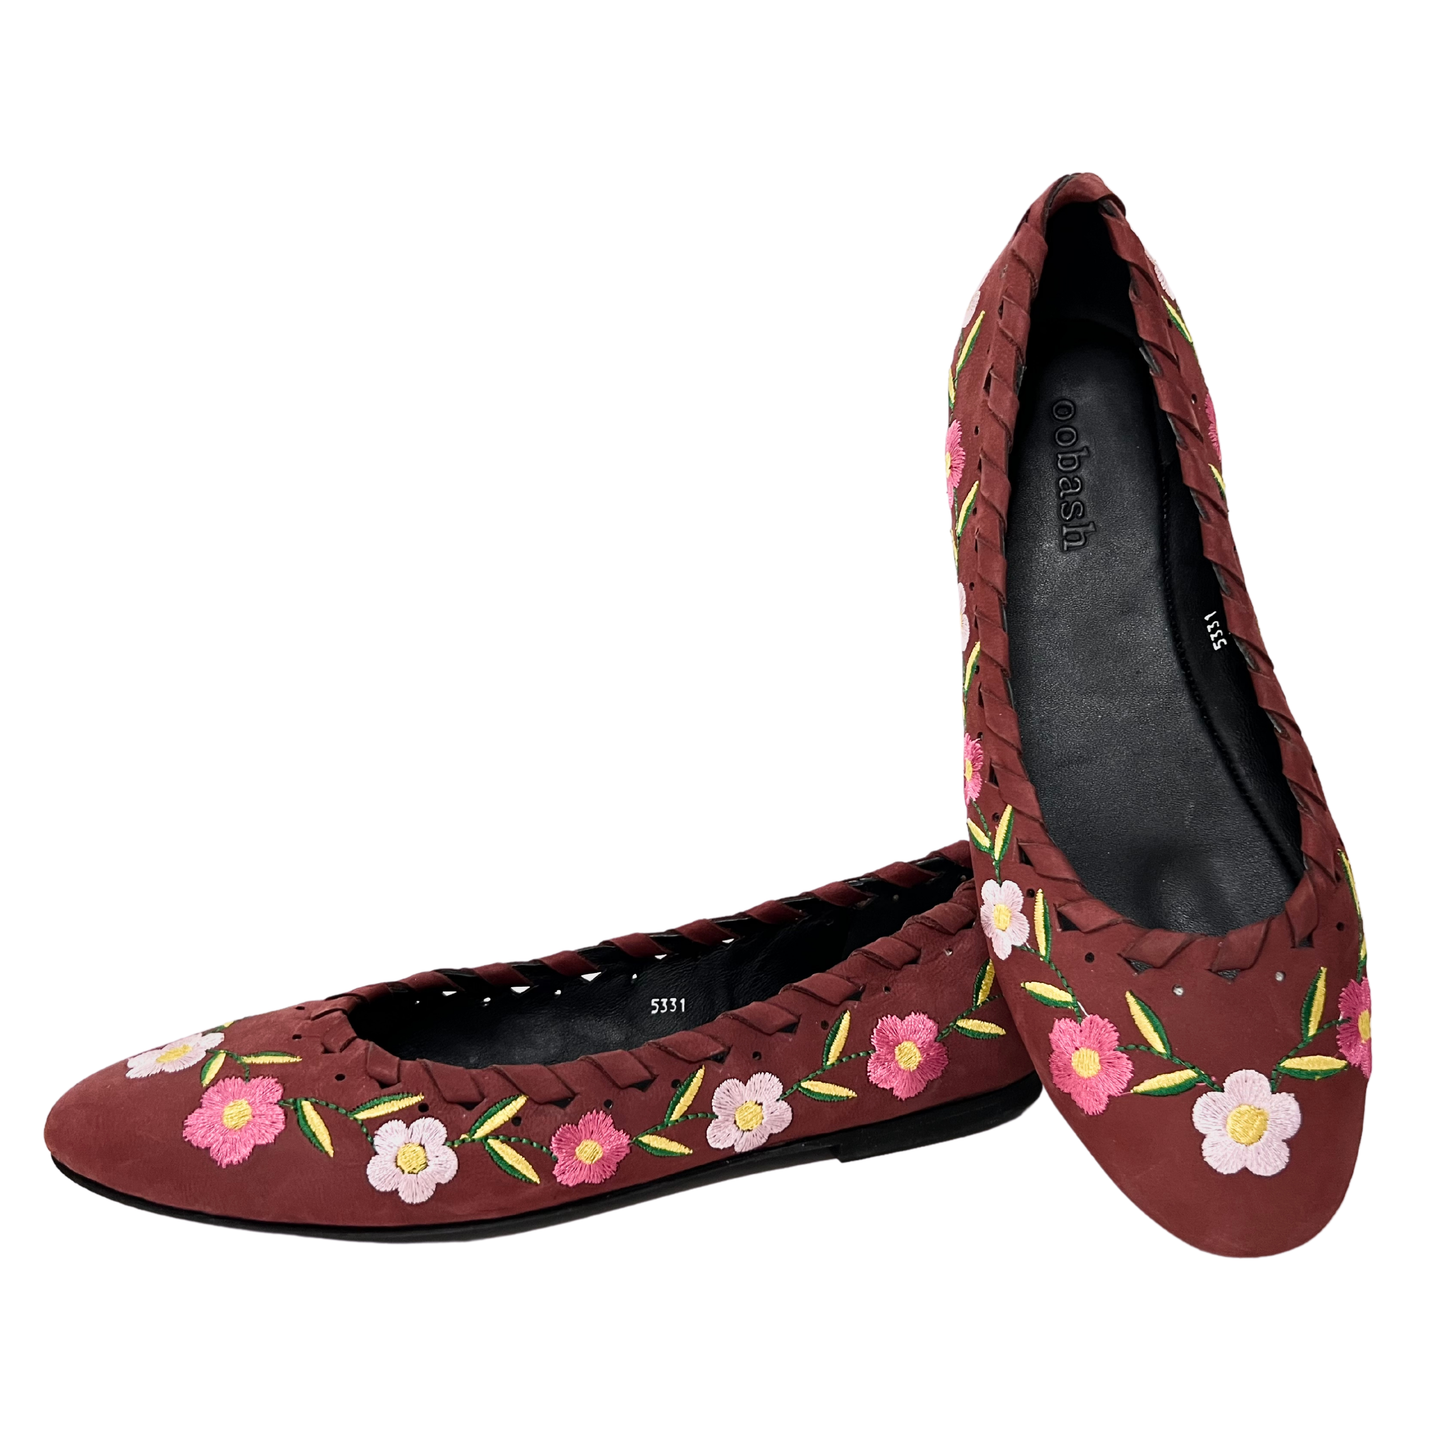 burgundy color flower embroidered leather ballerina for ladies